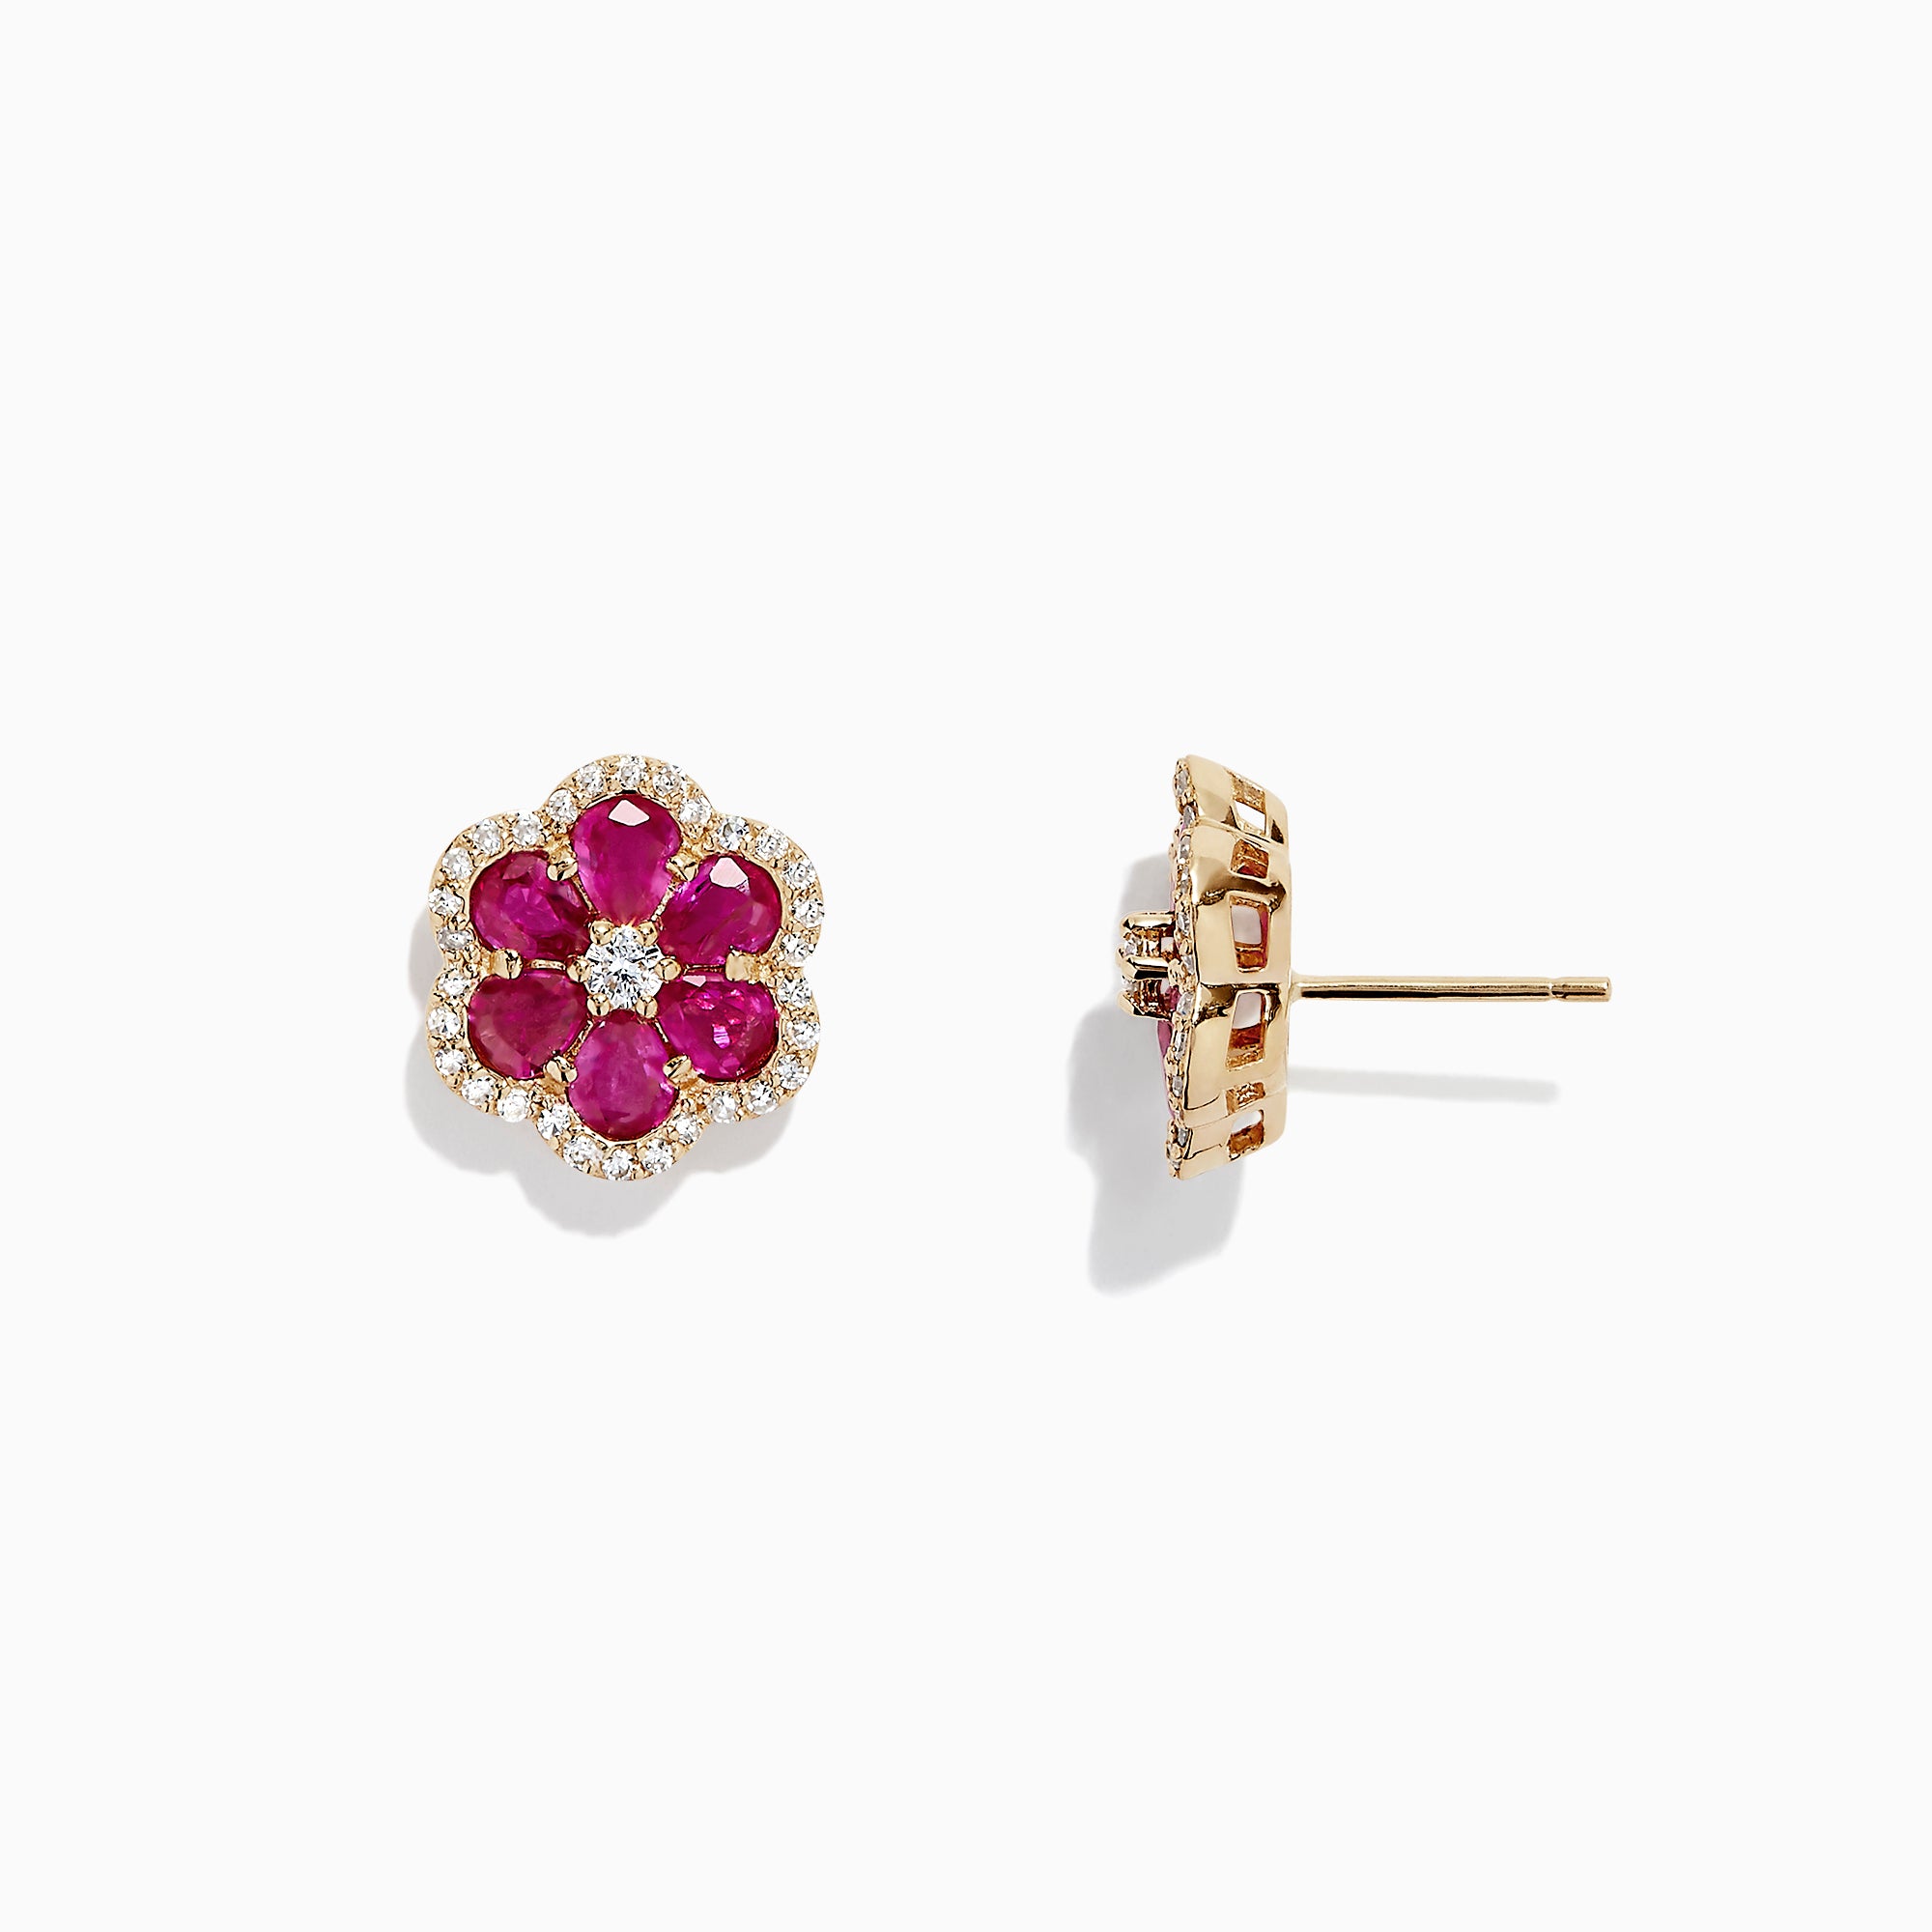 Effy Ruby Royale 14K Yellow Gold Ruby and Diamond Flower Earrings, 3.18 TCW